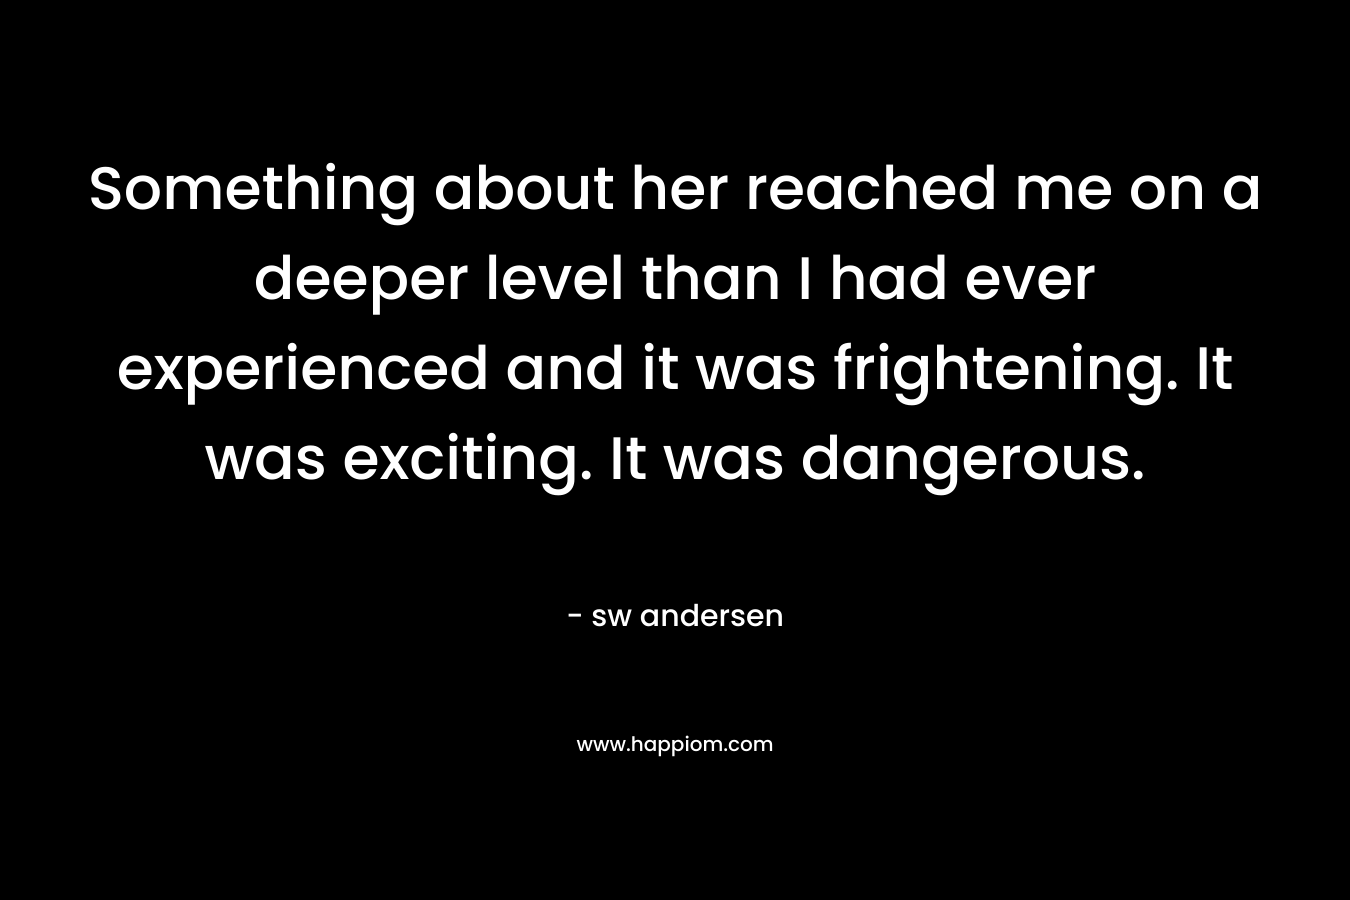 Something about her reached me on a deeper level than I had ever experienced and it was frightening. It was exciting. It was dangerous. – sw andersen